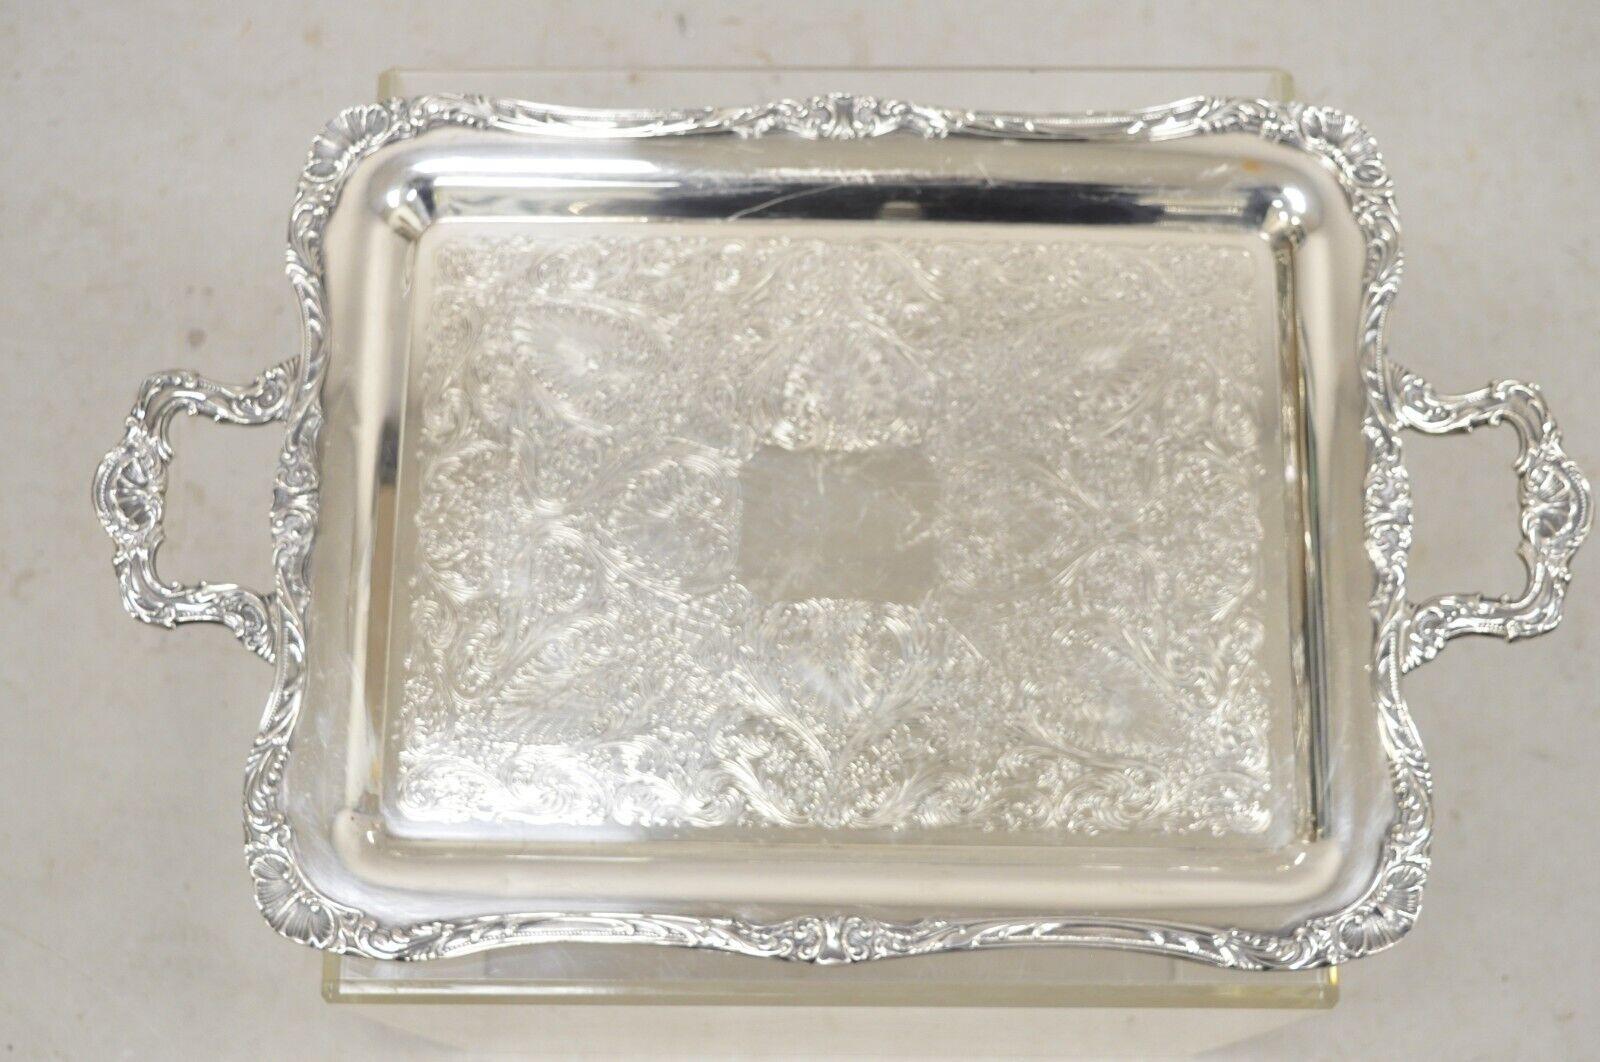 Vintage WM Rogers 290 Silver Plated Ornate Victorian Style Serving Platter Tray. Circa  Milieu et fin du 20e siècle.
Dimensions : 1,5